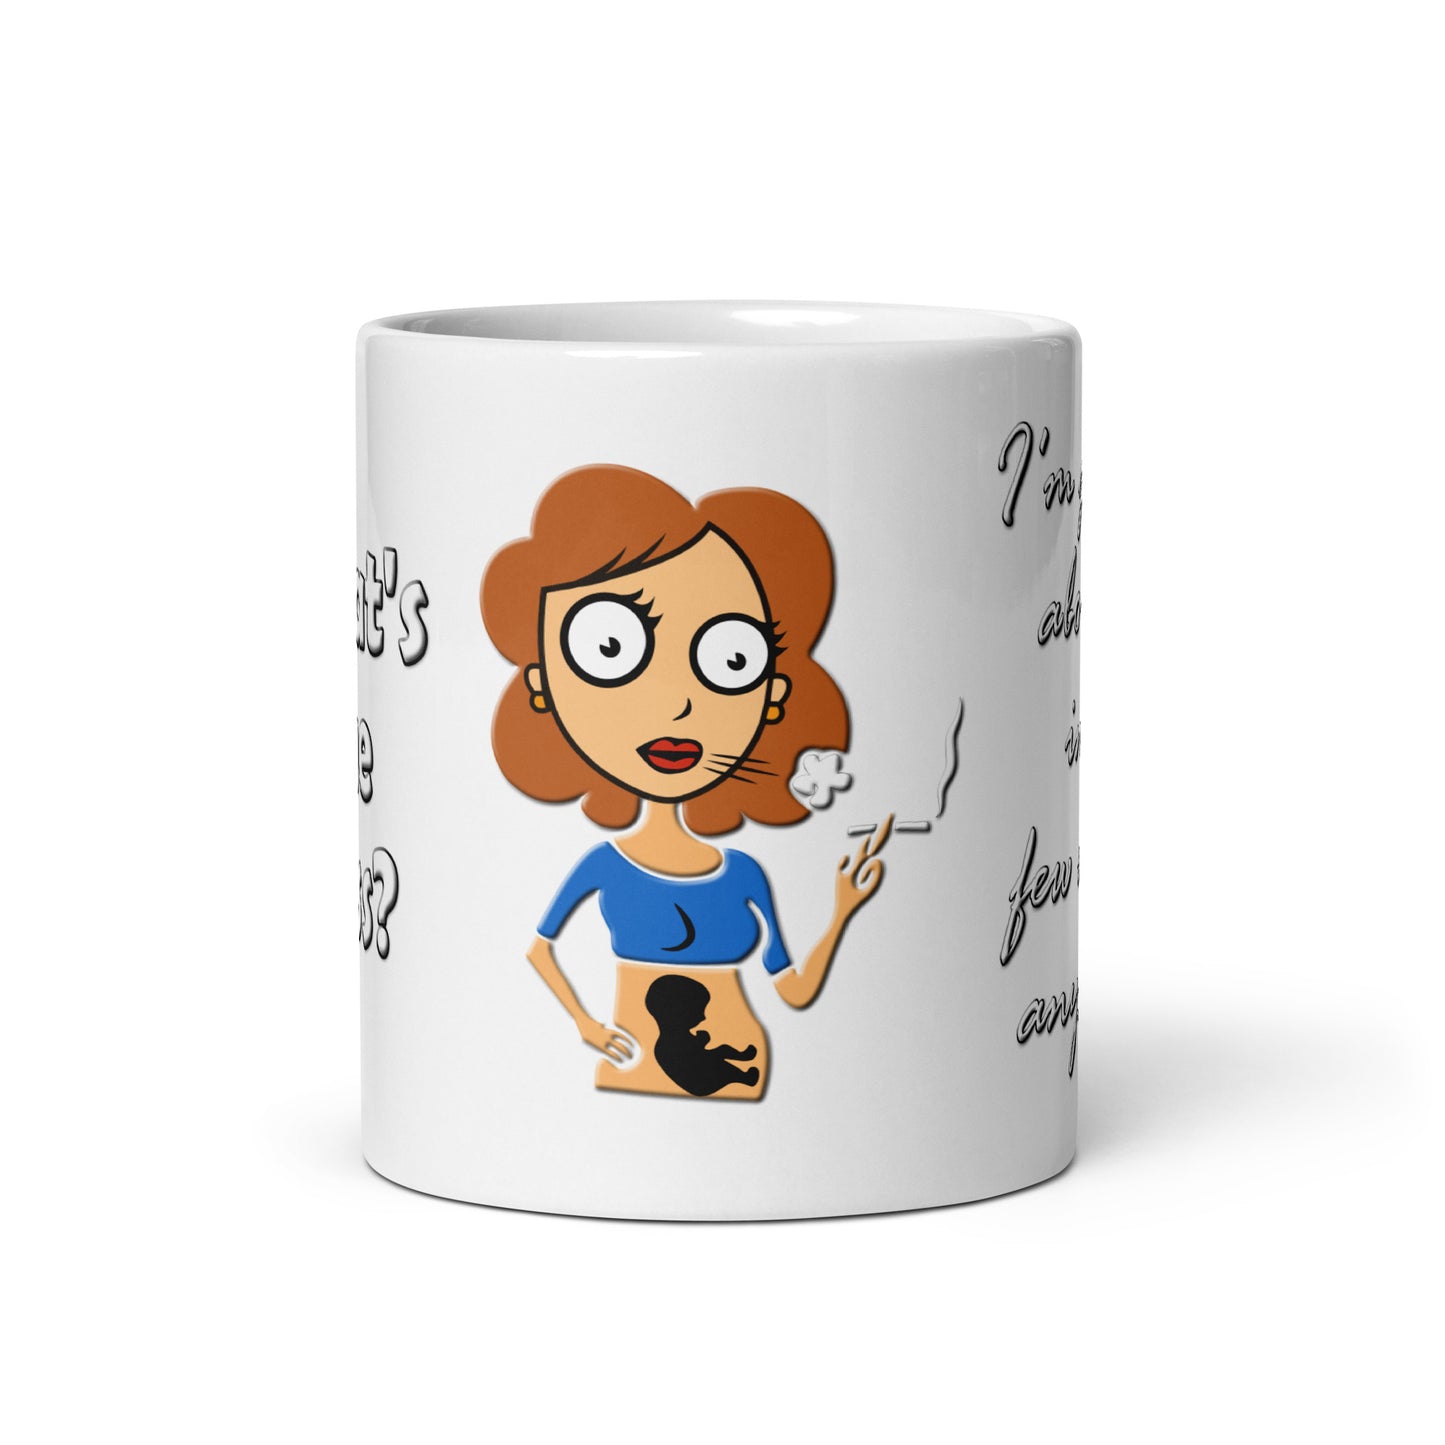 A015 Mug - White Glossy Ceramic Mug Featuring a Graphic of a Young Pregnant Woman Smoking, with the Text “What’s the Fuss? I’m Just Gonna Abort It in a Few Weeks Anyway.”